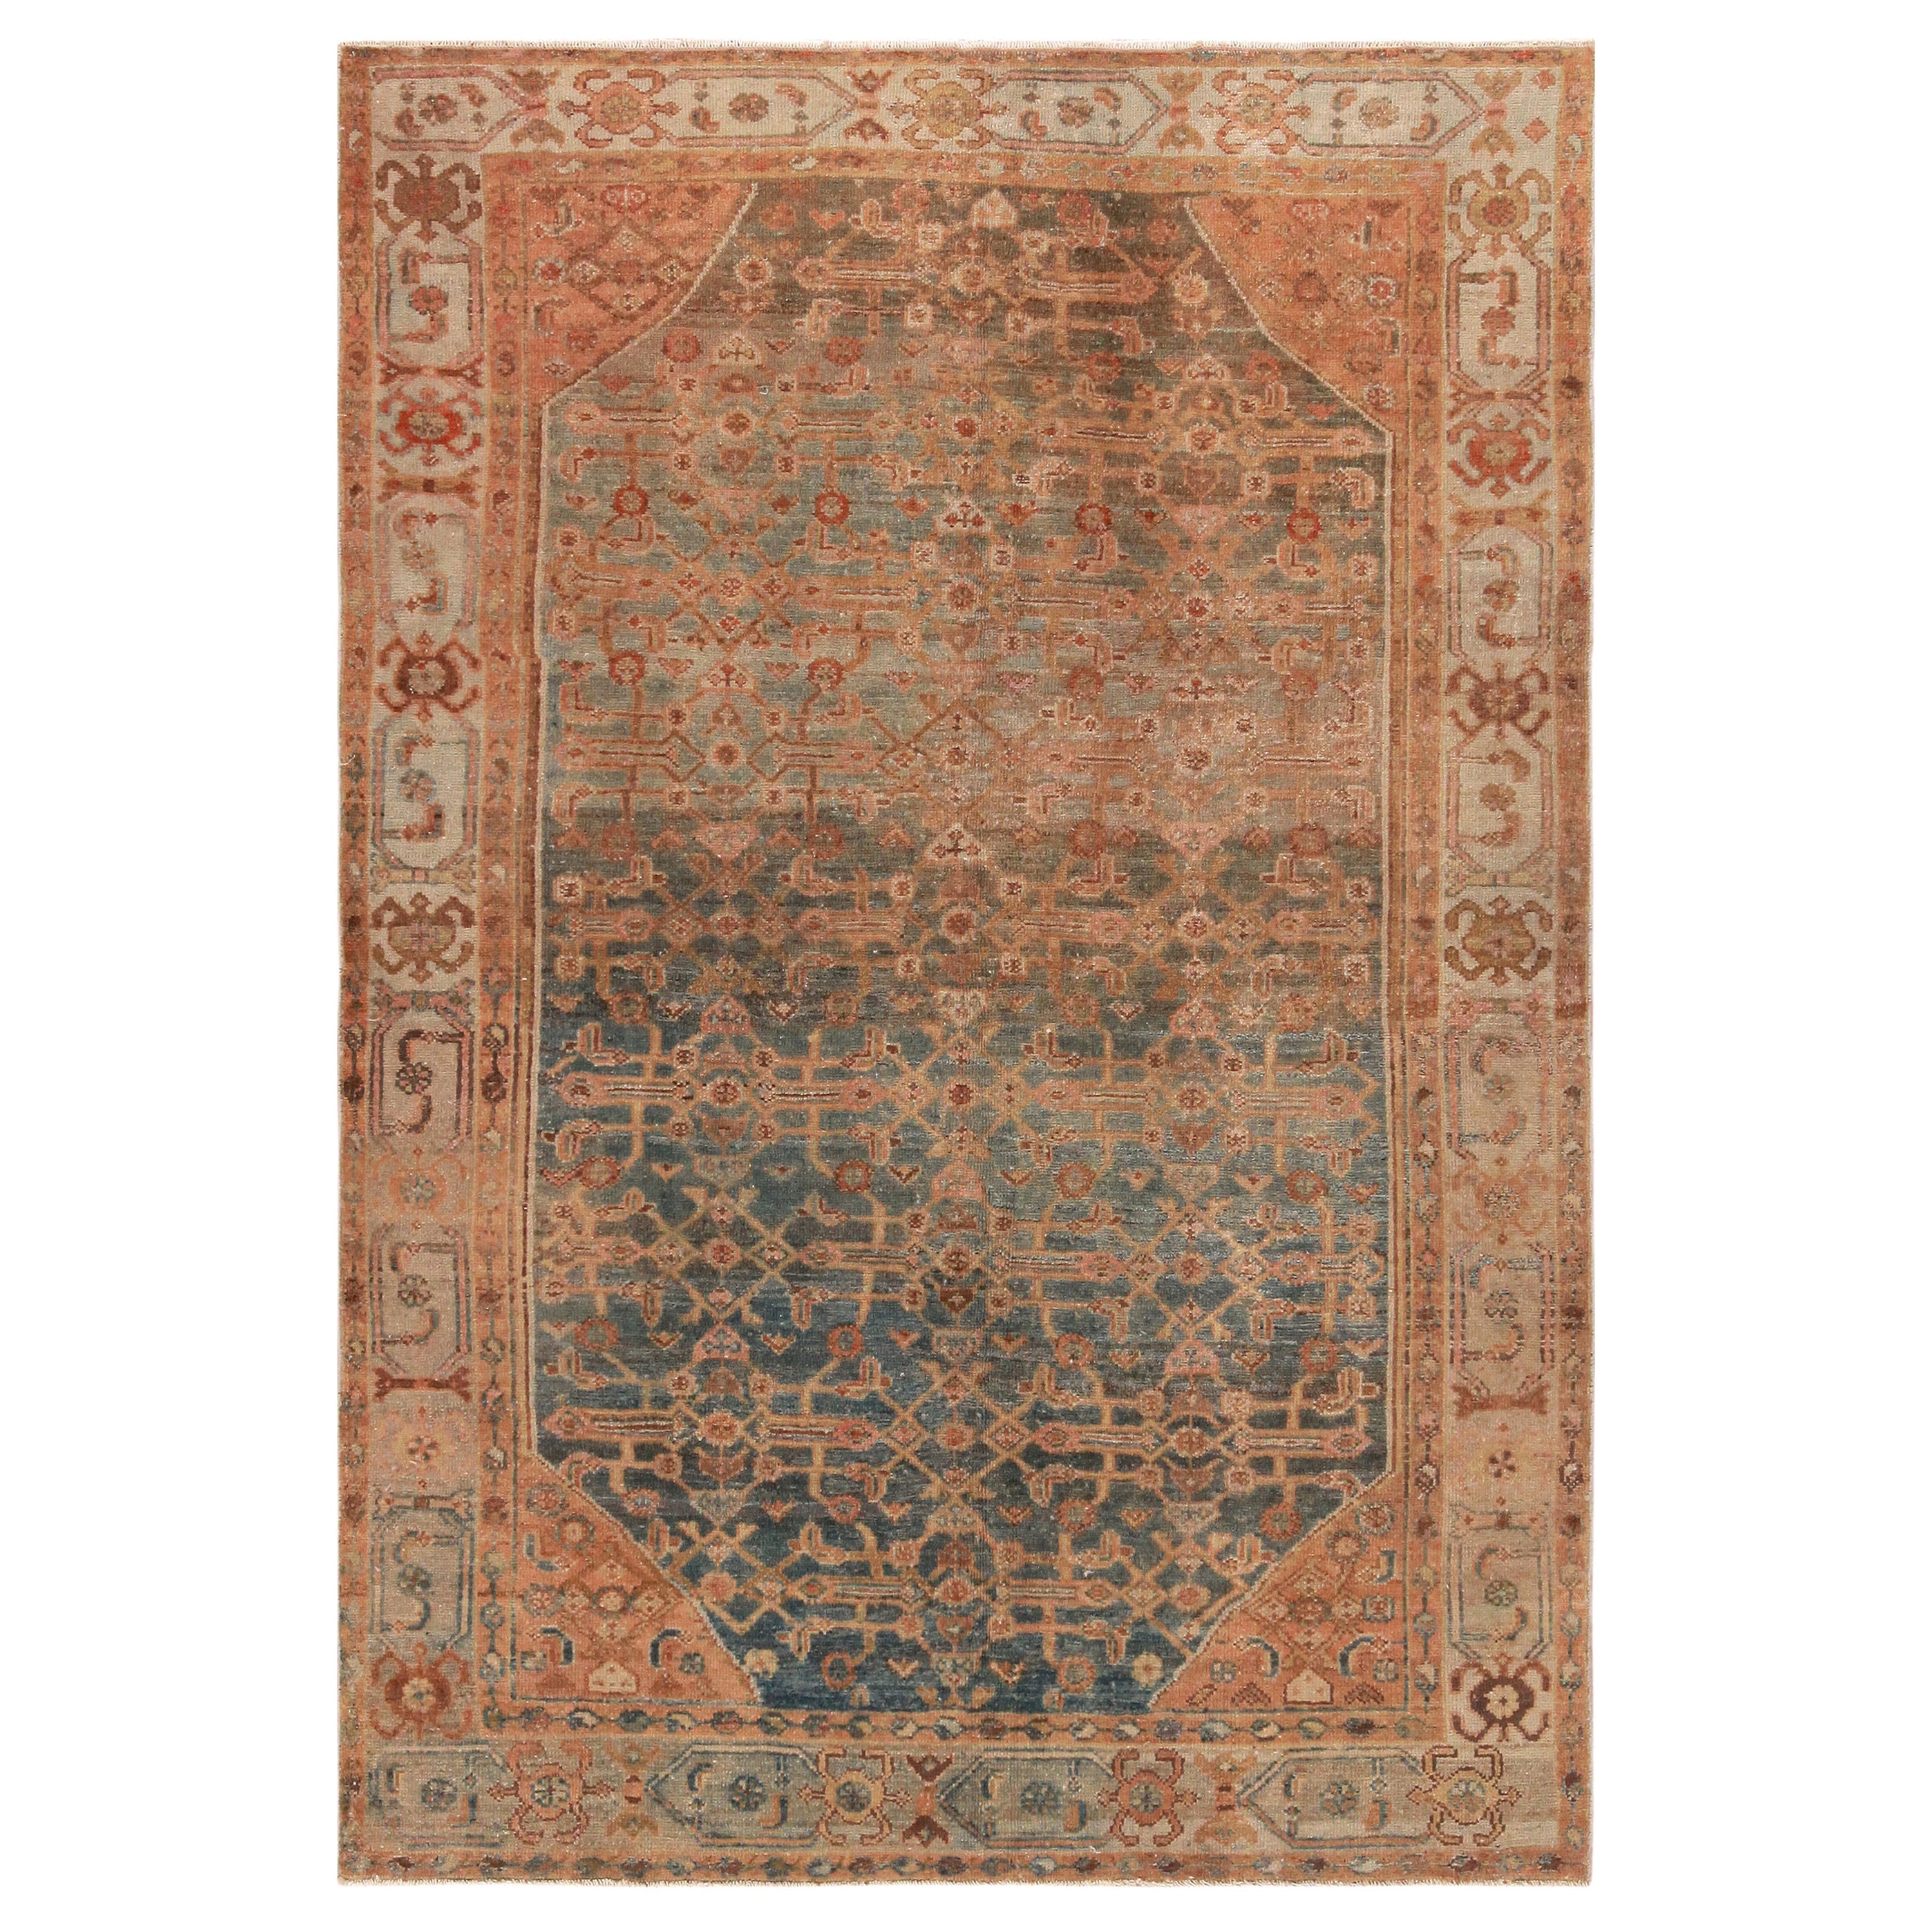 Antique Persian Malayer Rug. Size: 4 ft 4 in x 6 ft 6 in